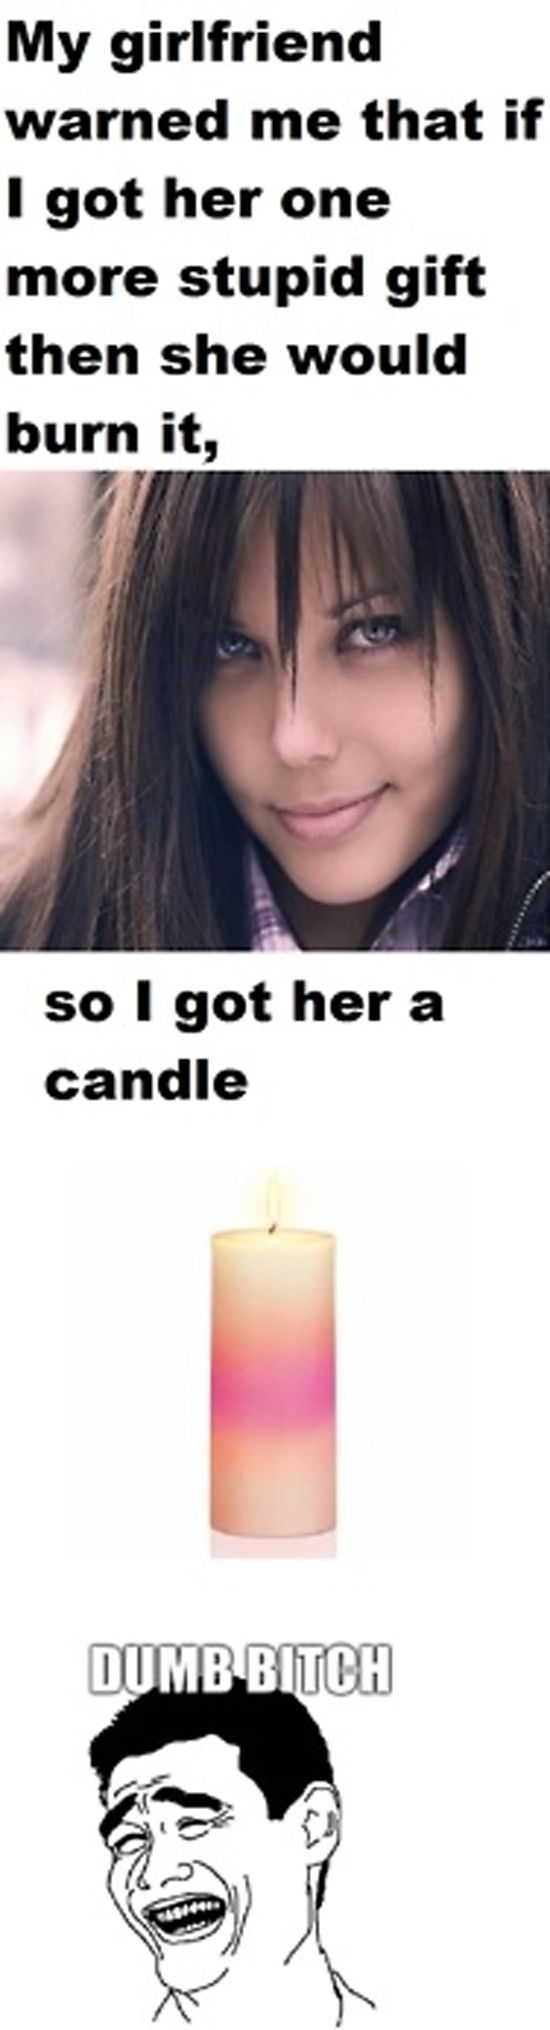 My girlfriend warned me that if I got her one more stupid gift then she would burn it, so I got her a candle DUMB young lady